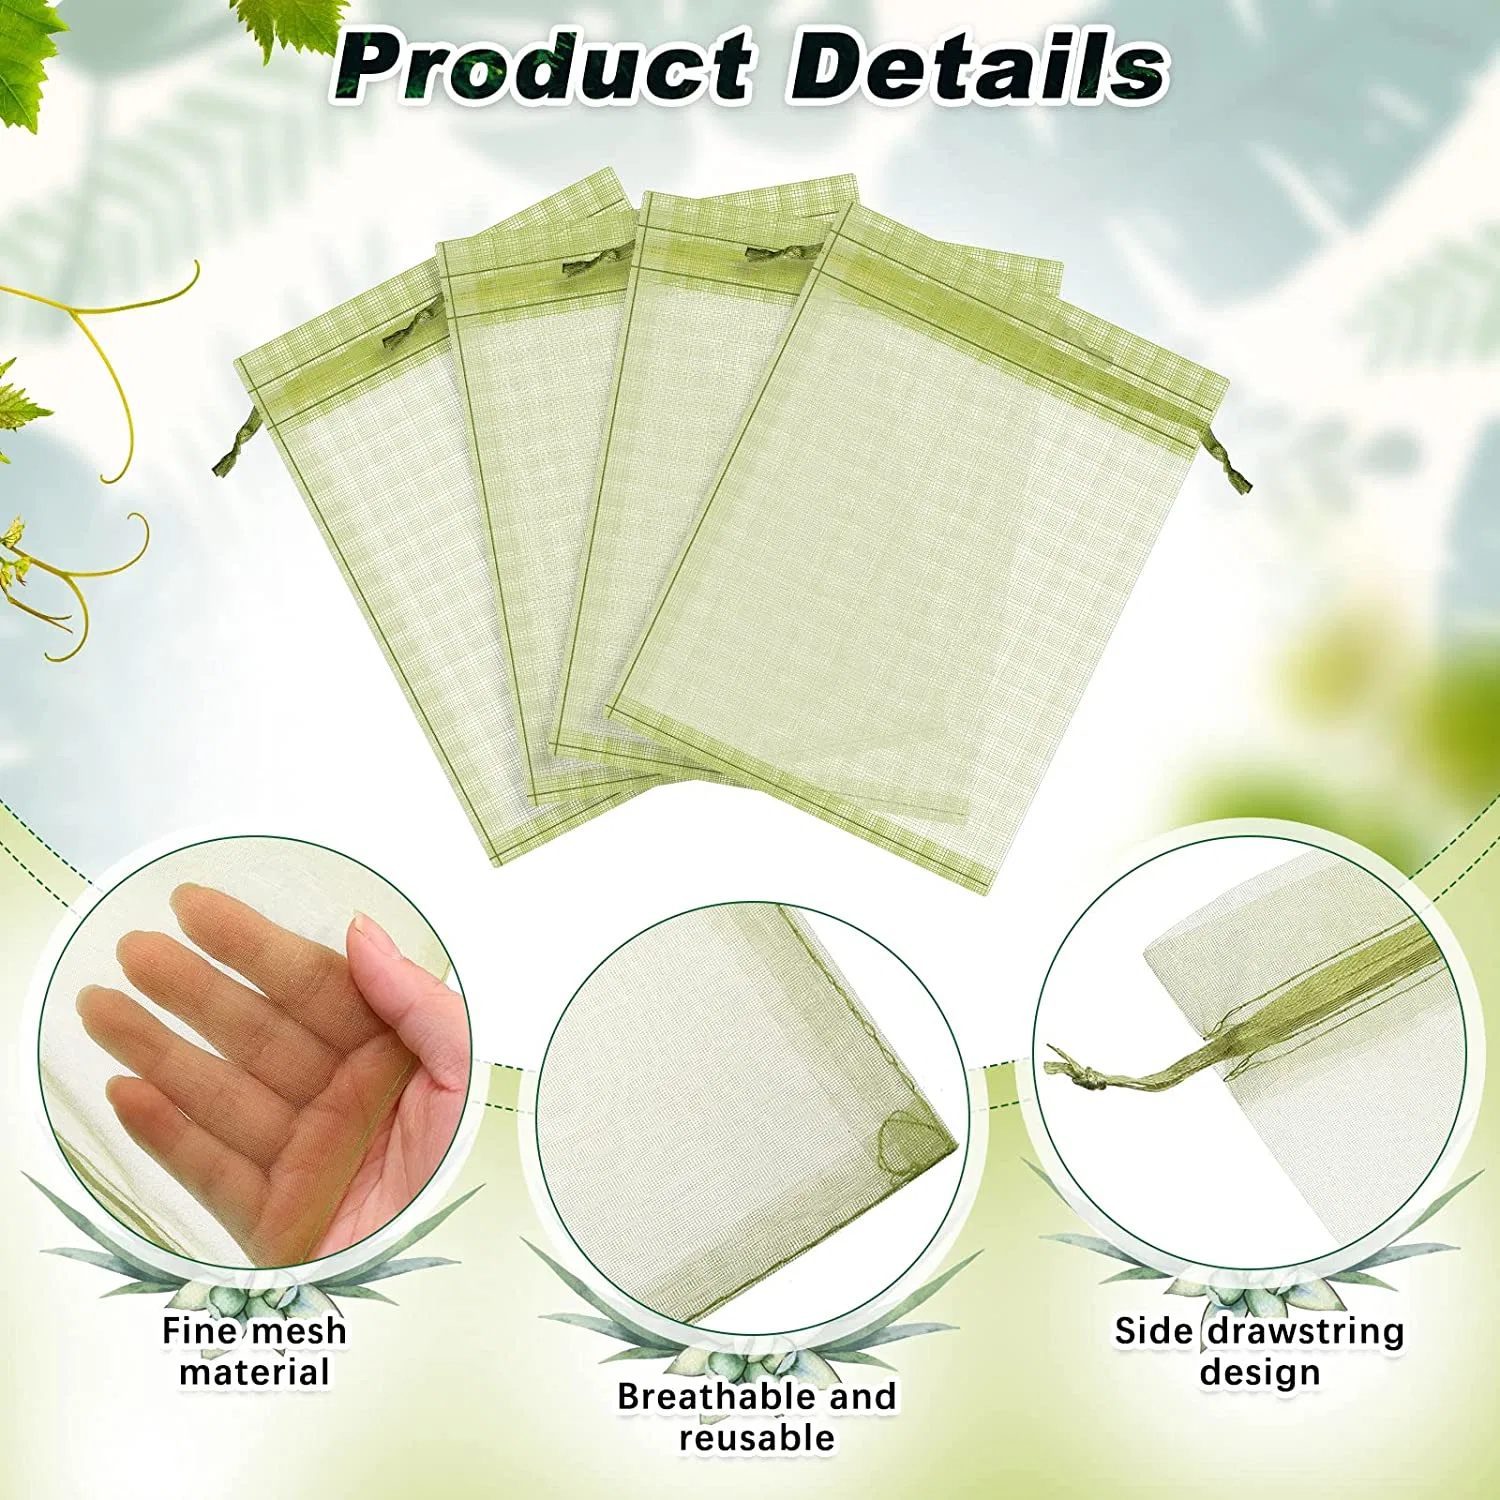 Plastic Anti Crow Net Plant Protection Agricultural Garden Insect Net Garden Mosquito Netting: Large Size: 2.5&times; 10m, Ultra Fine Mesh Size 0.03*0.04 Inches